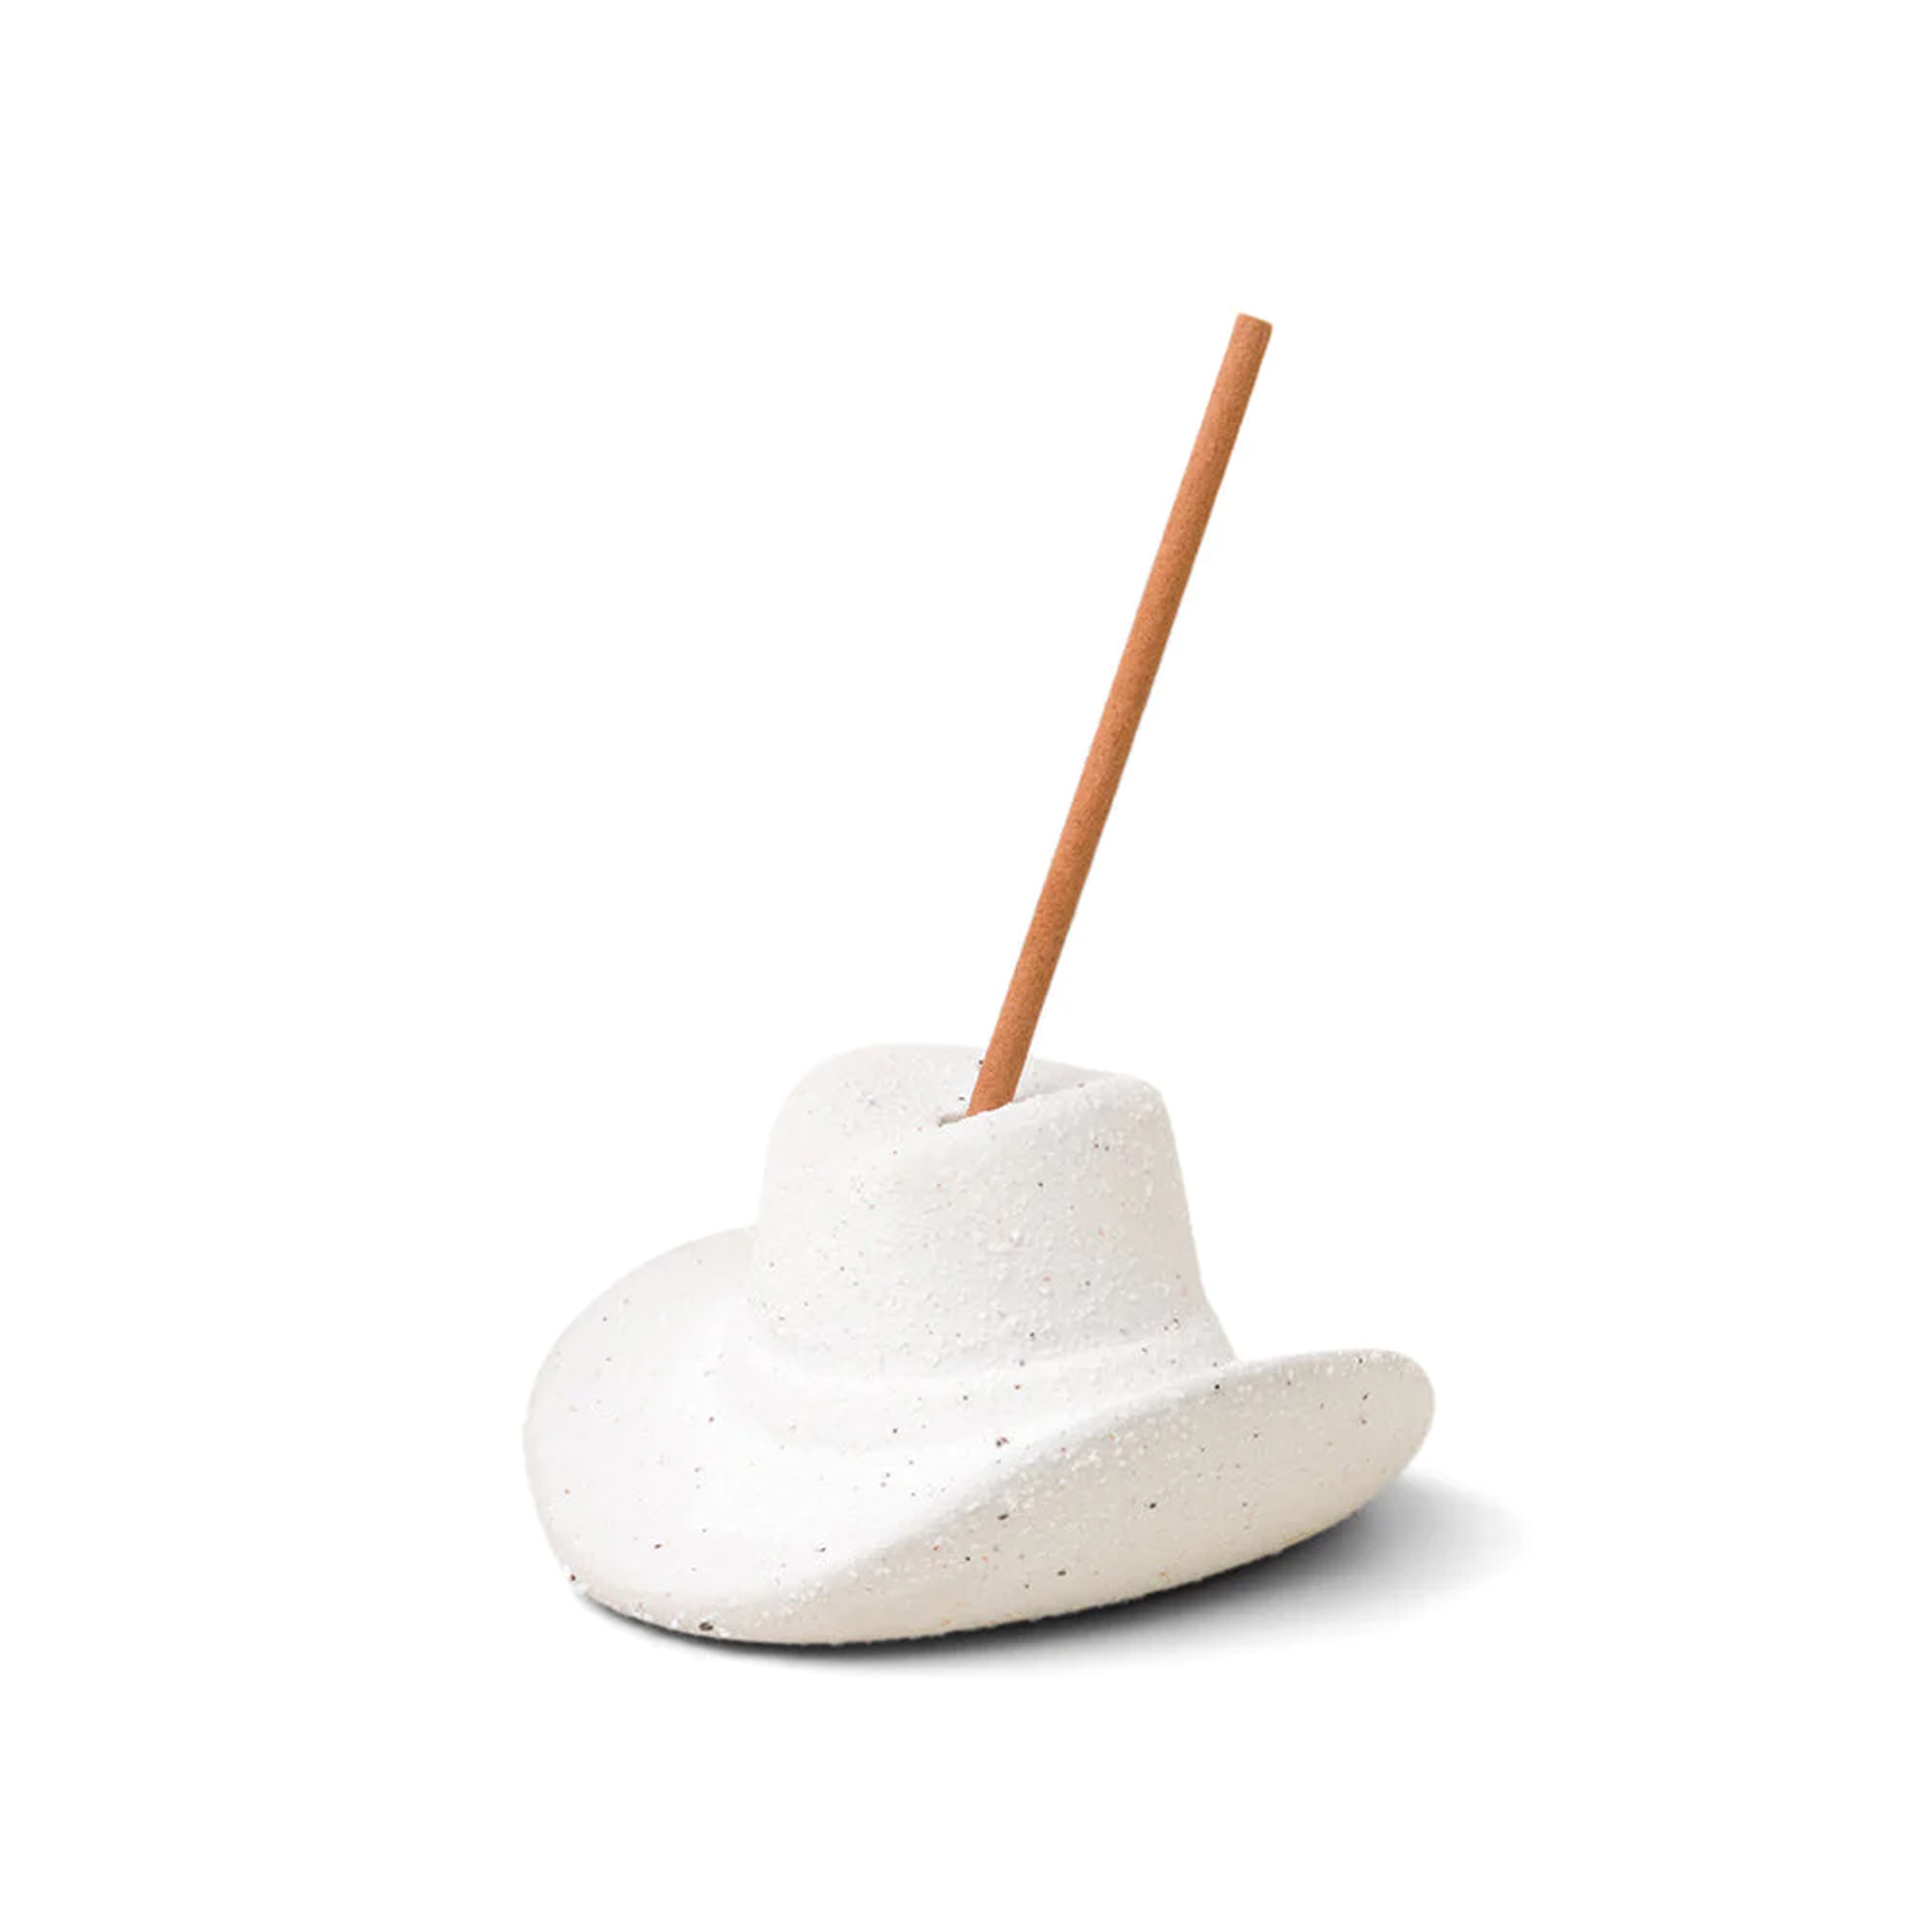 paddy-wax-cowboy-hat-incense-holder-white